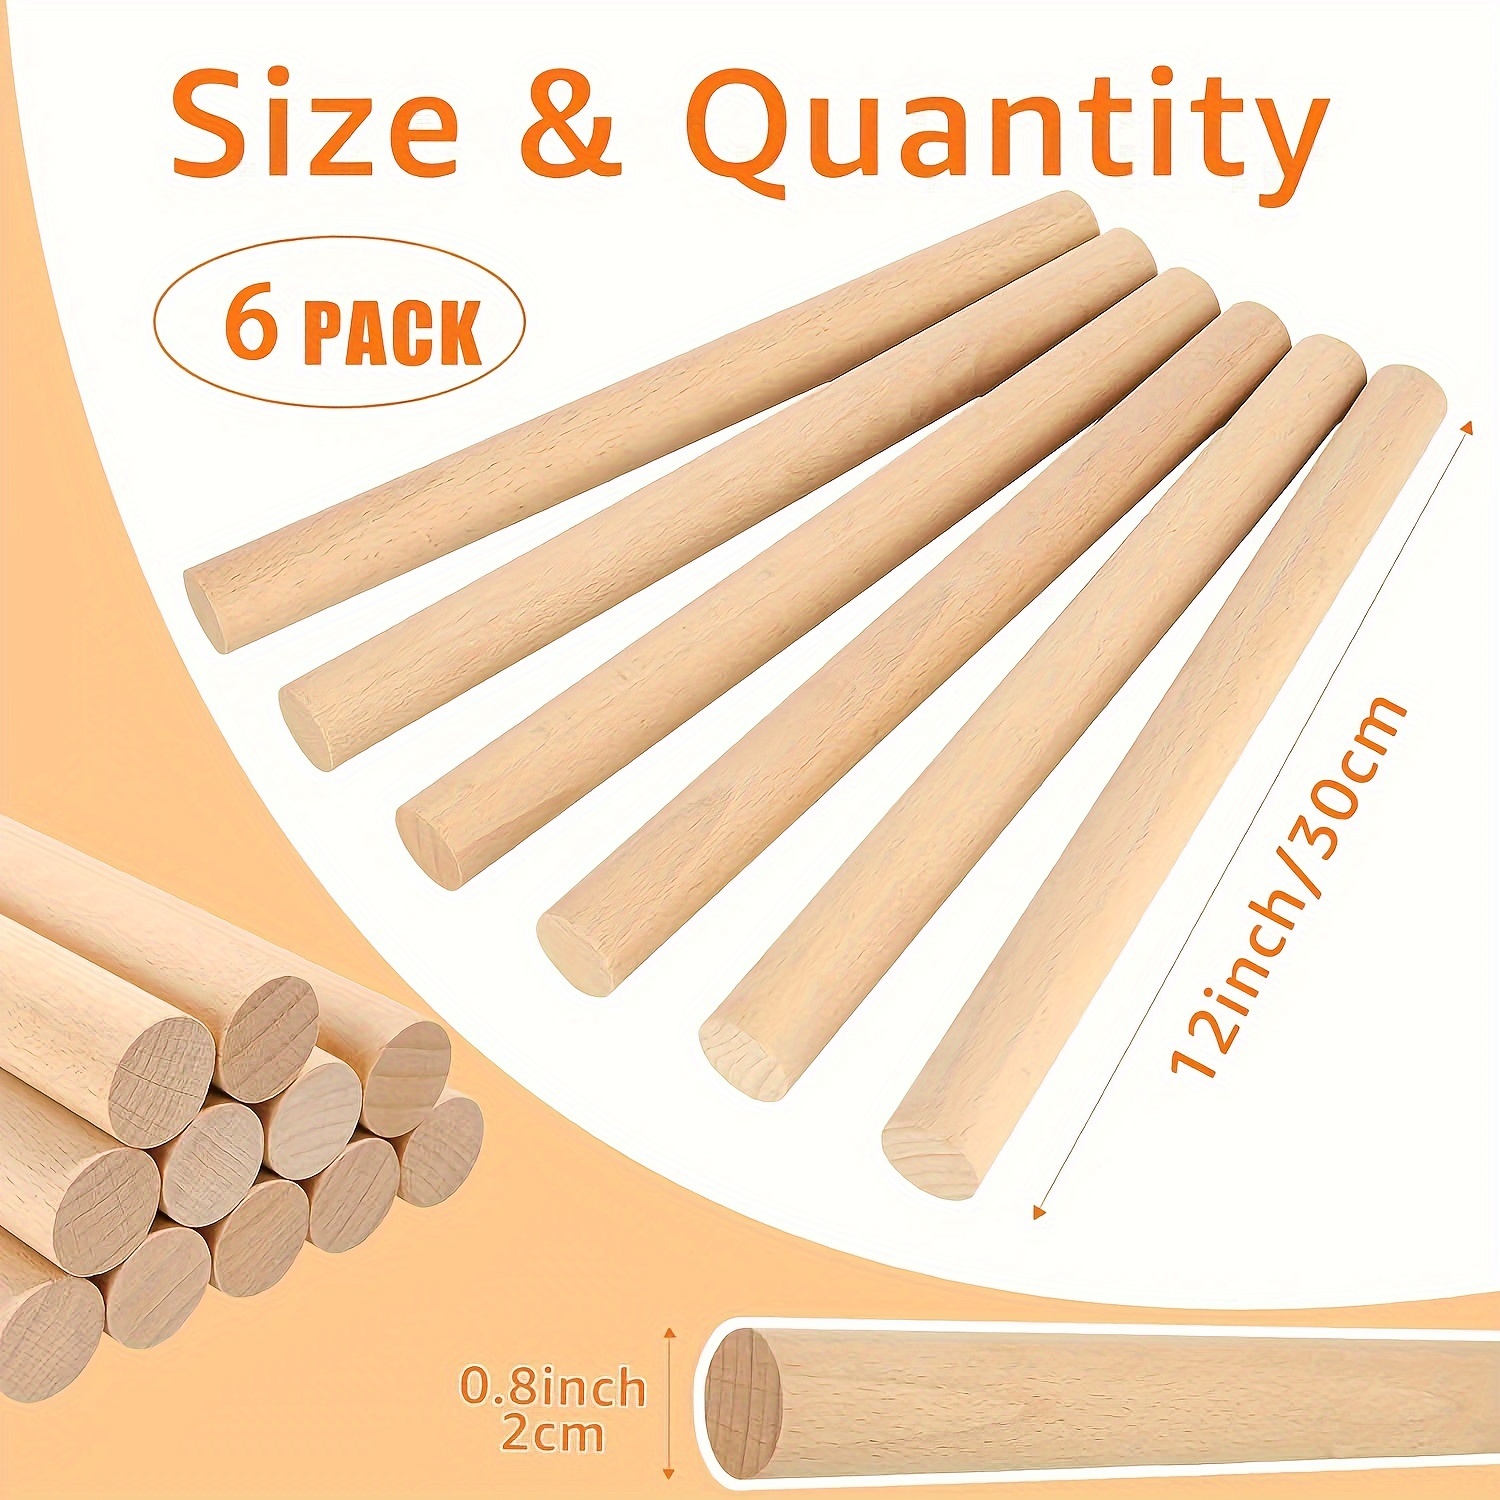 Wood Sticks Wooden Dowel Rods - 1/2 Inch x 12 Inch Unfinished